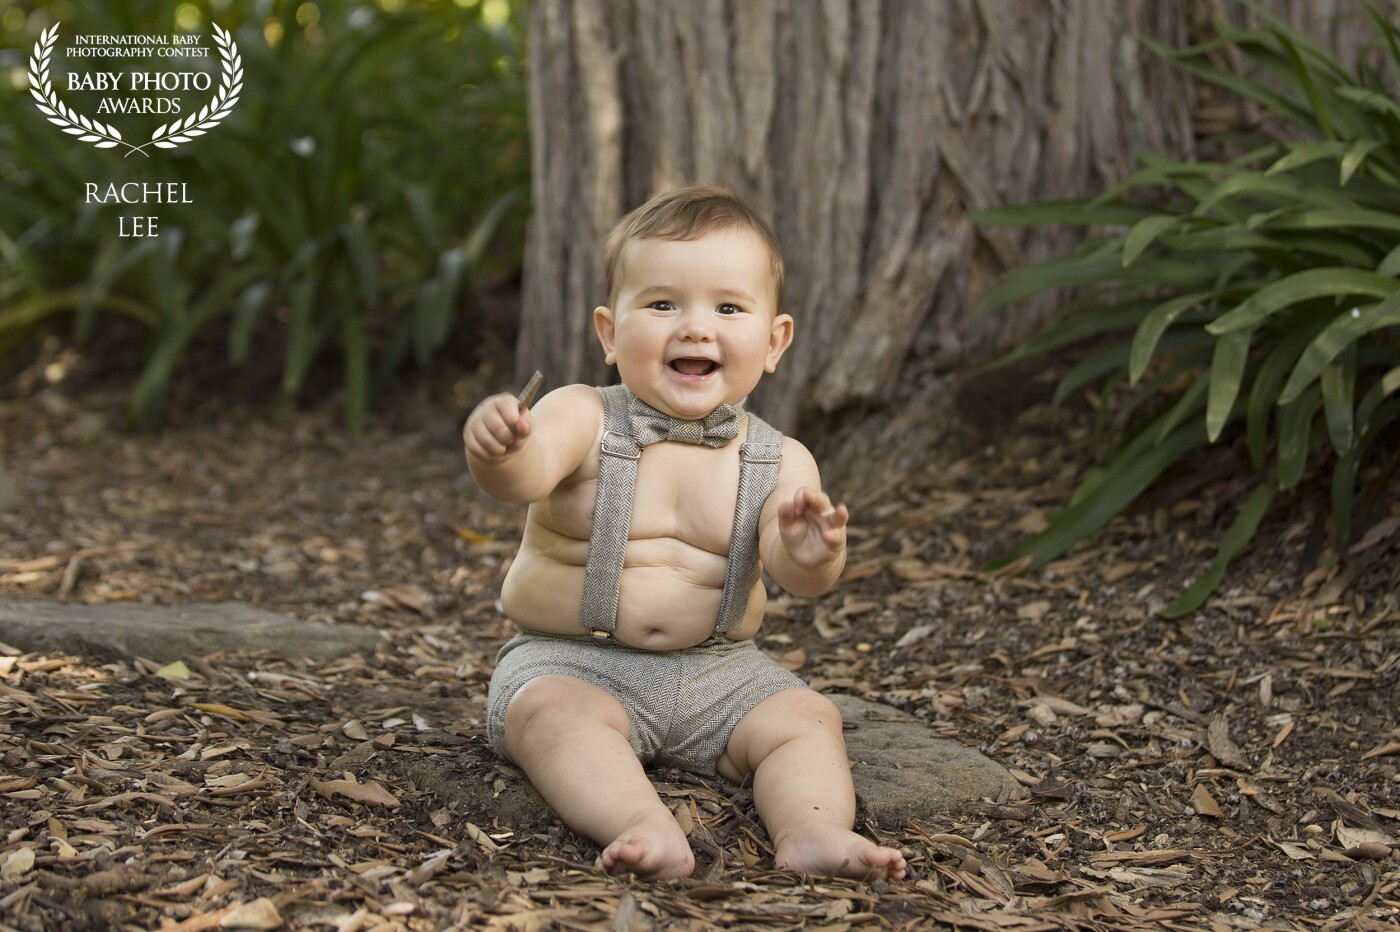 Those rolls! That smile! This little guy loved exploring the leaves (apparently they don't taste great!), playing and laughing. 